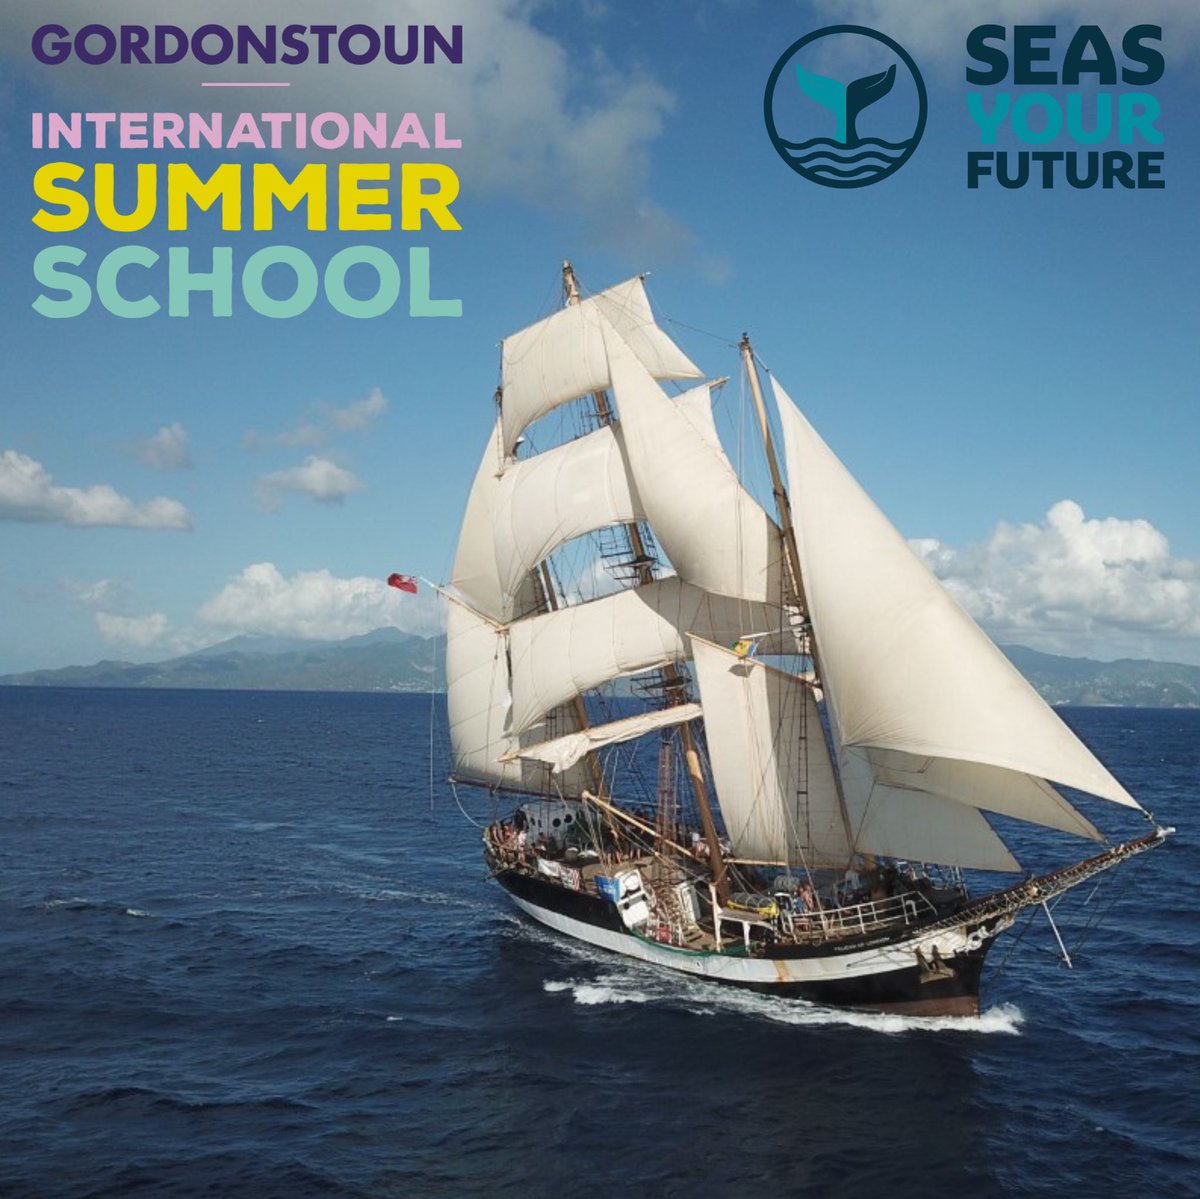 We are so looking forward to working with our new partner @seasyourfuture and to their tall ship joining our sailing fleet. It’s going to be brilliant! #seeyousoon #gordonstouninternationalsummerschool #summerschool